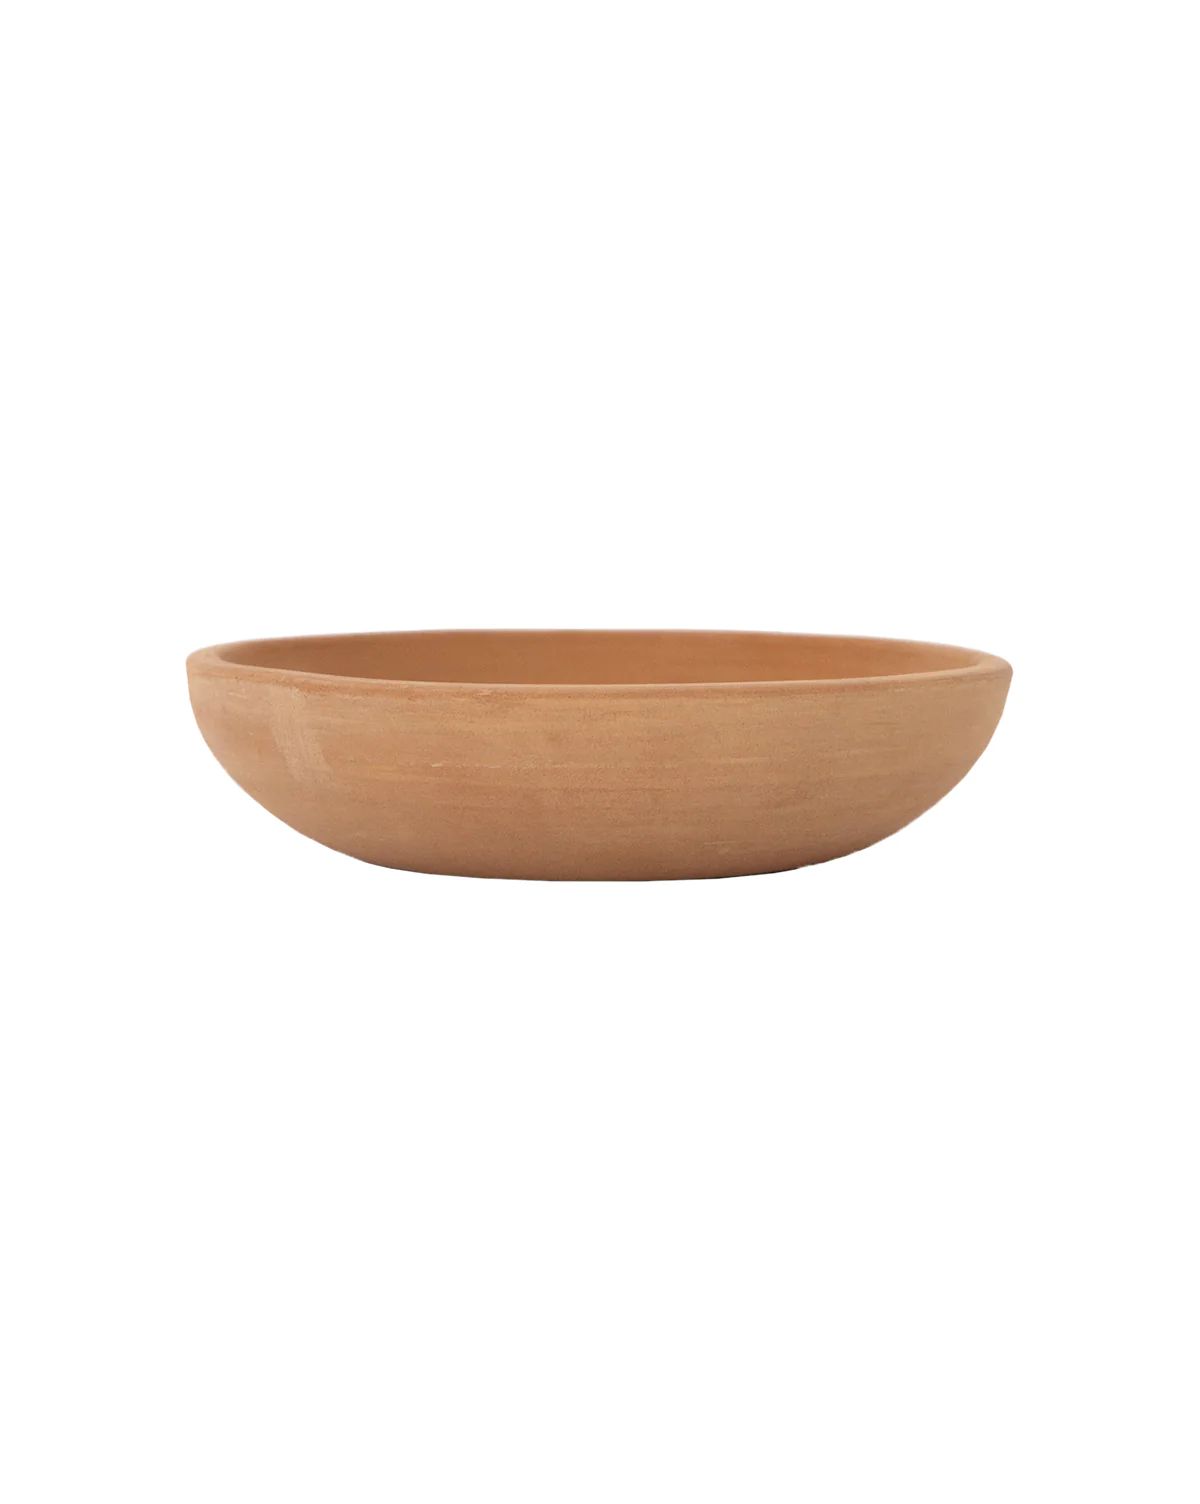 Low Terracotta Bowl | McGee & Co.